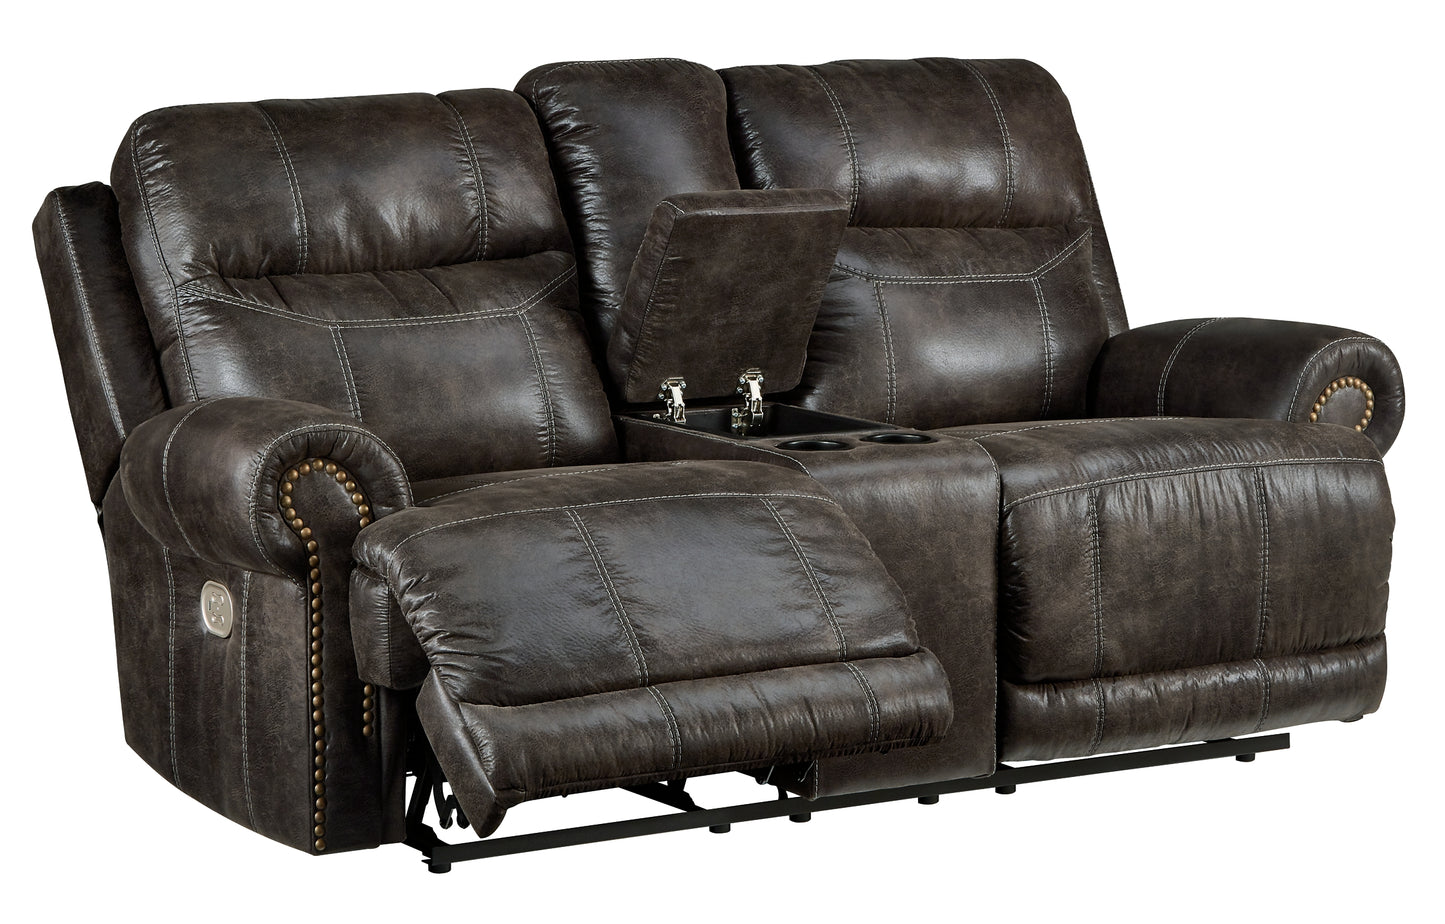 Grearview Sofa and Loveseat JB's Furniture  Home Furniture, Home Decor, Furniture Store